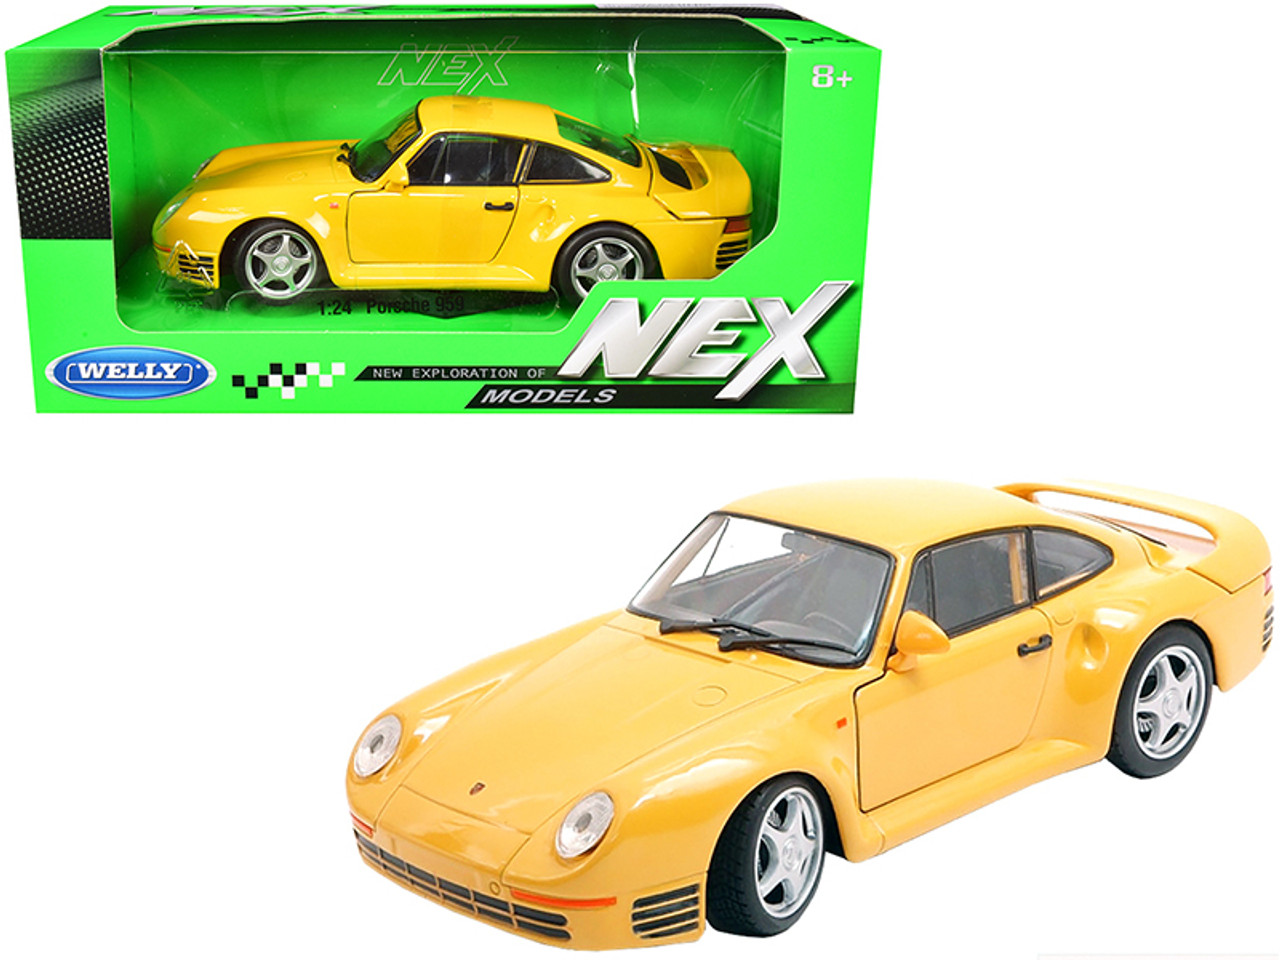 Porsche 959 Yellow with Silver Wheels "NEX Models" 1/24 Diecast Model Car by Welly